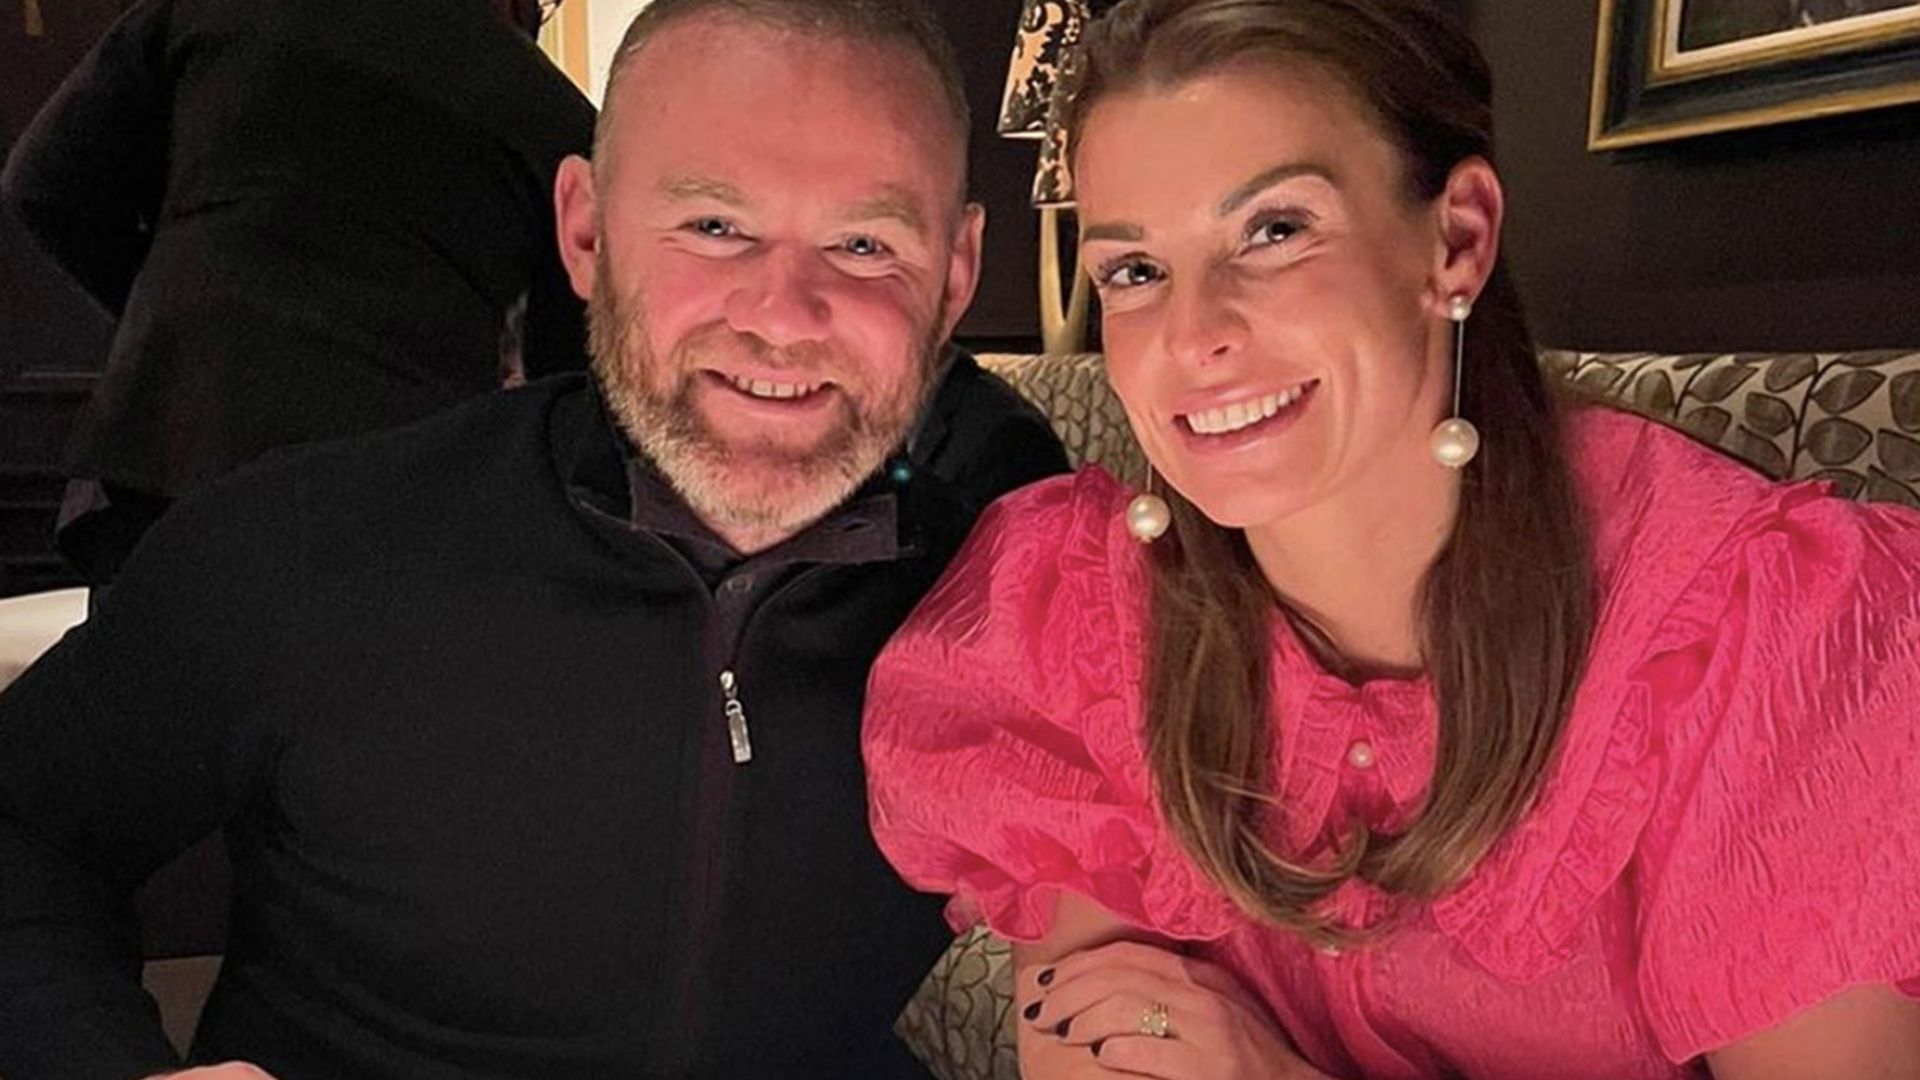 Coleen Rooney's red mini dress is taking over Instagram right now